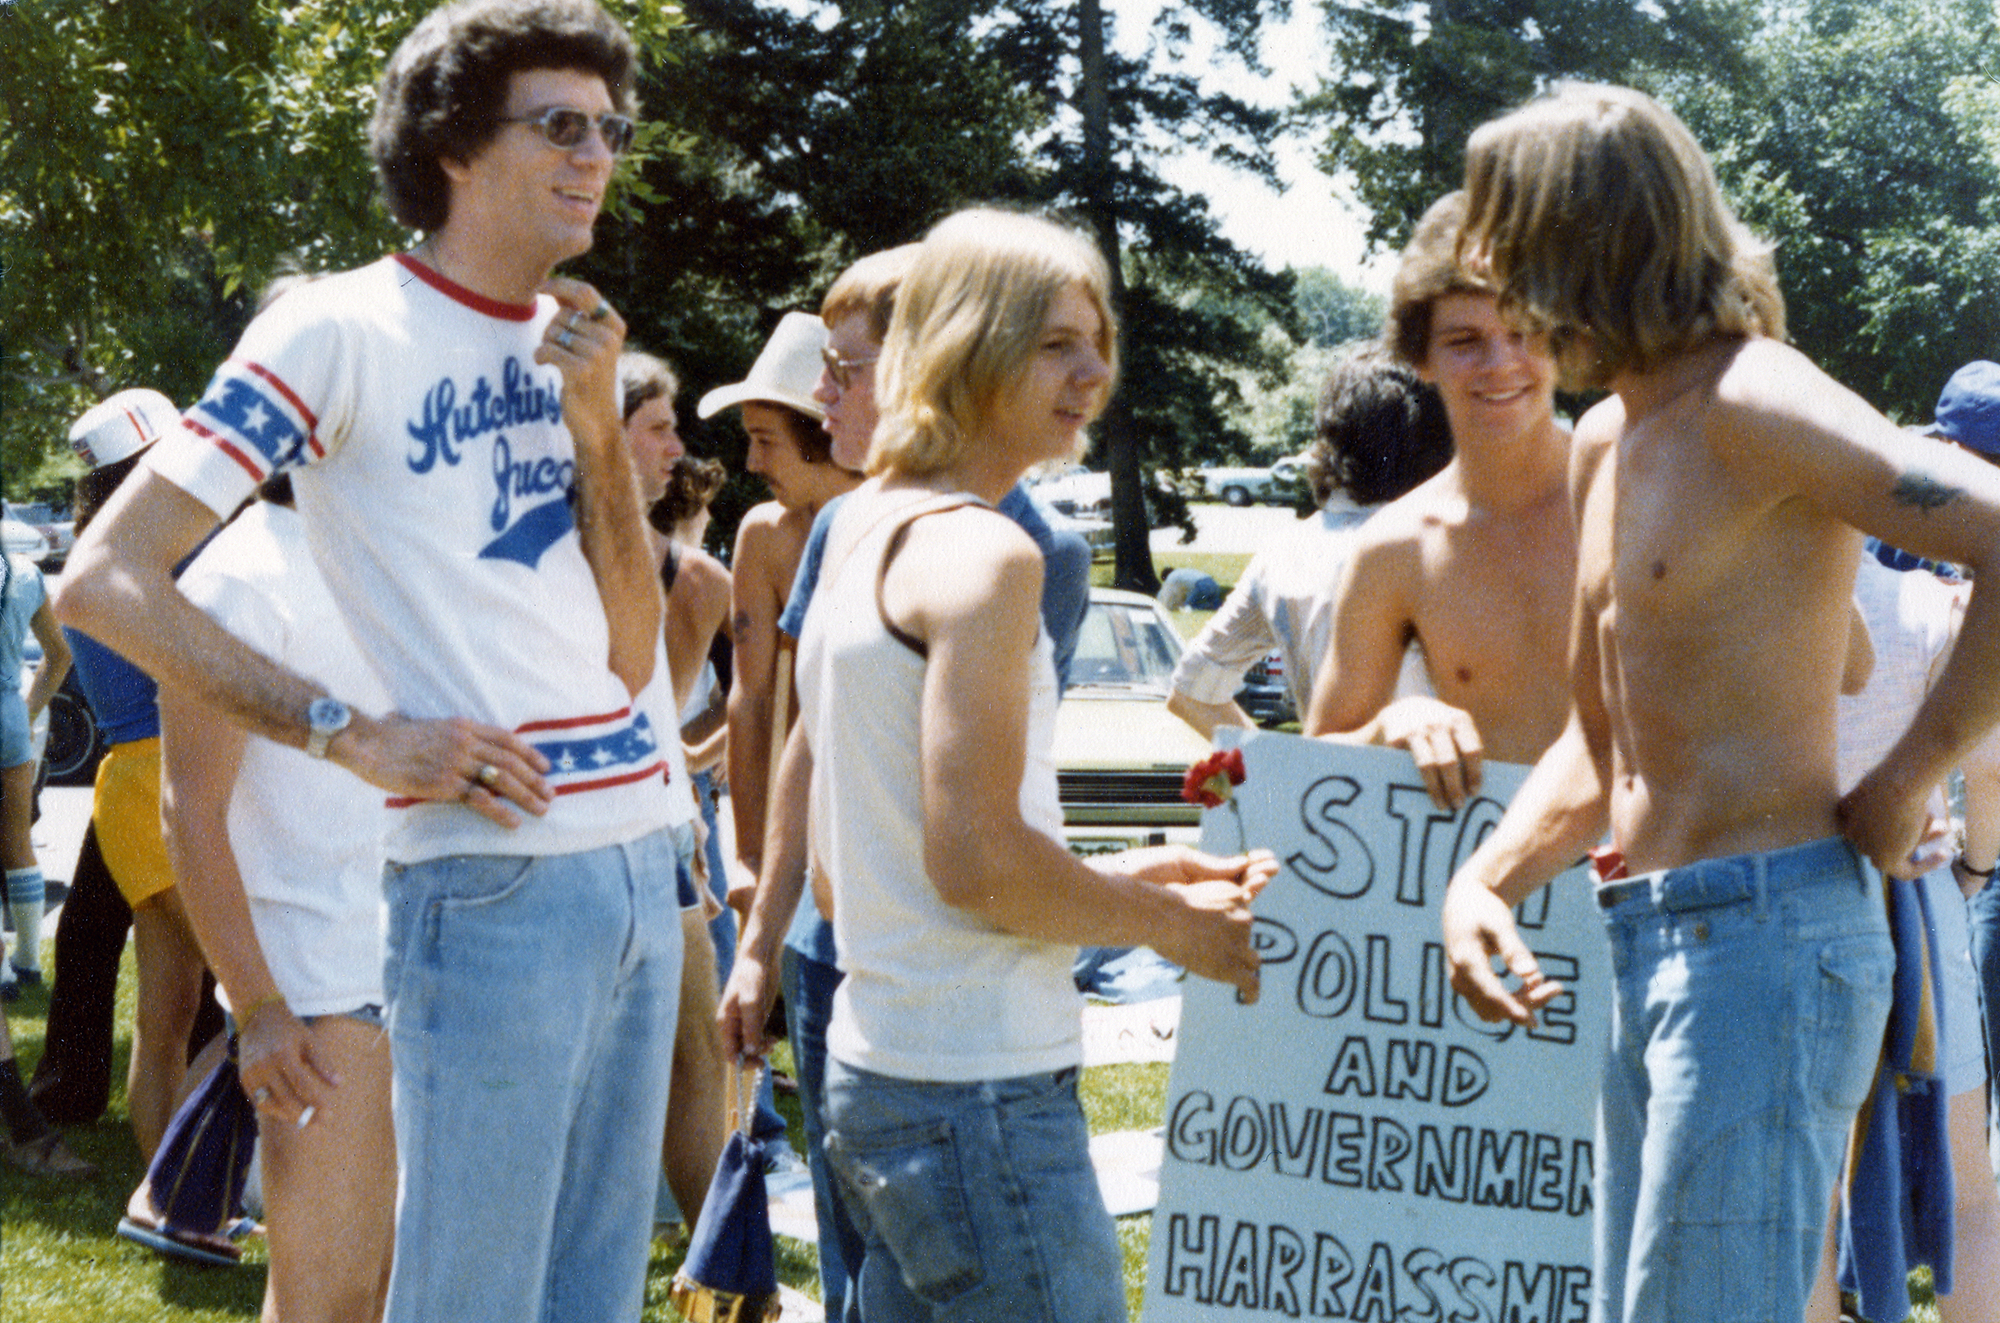 A group of young men, one holding a picket sign, standing in a park.